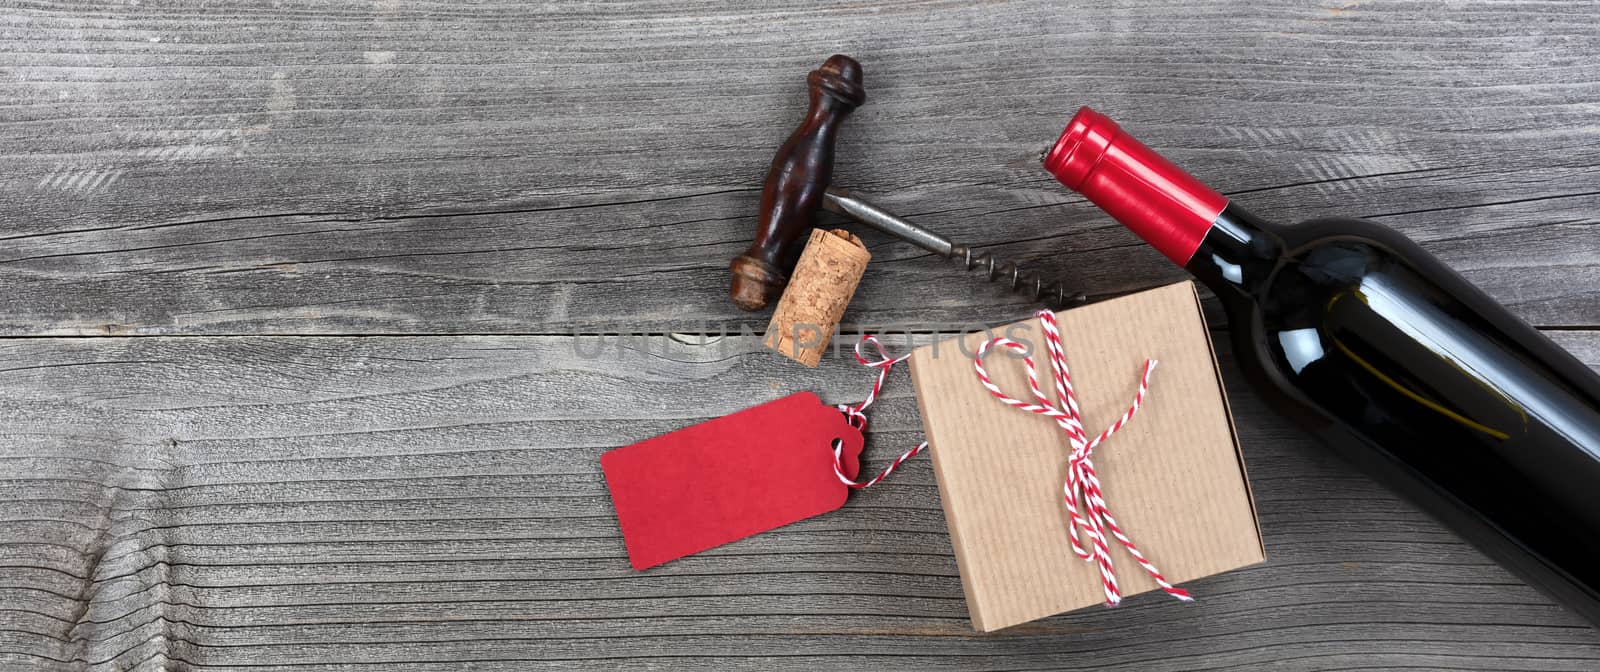 Fathers day gift box with a bottle of red wine and opener for th by tab1962